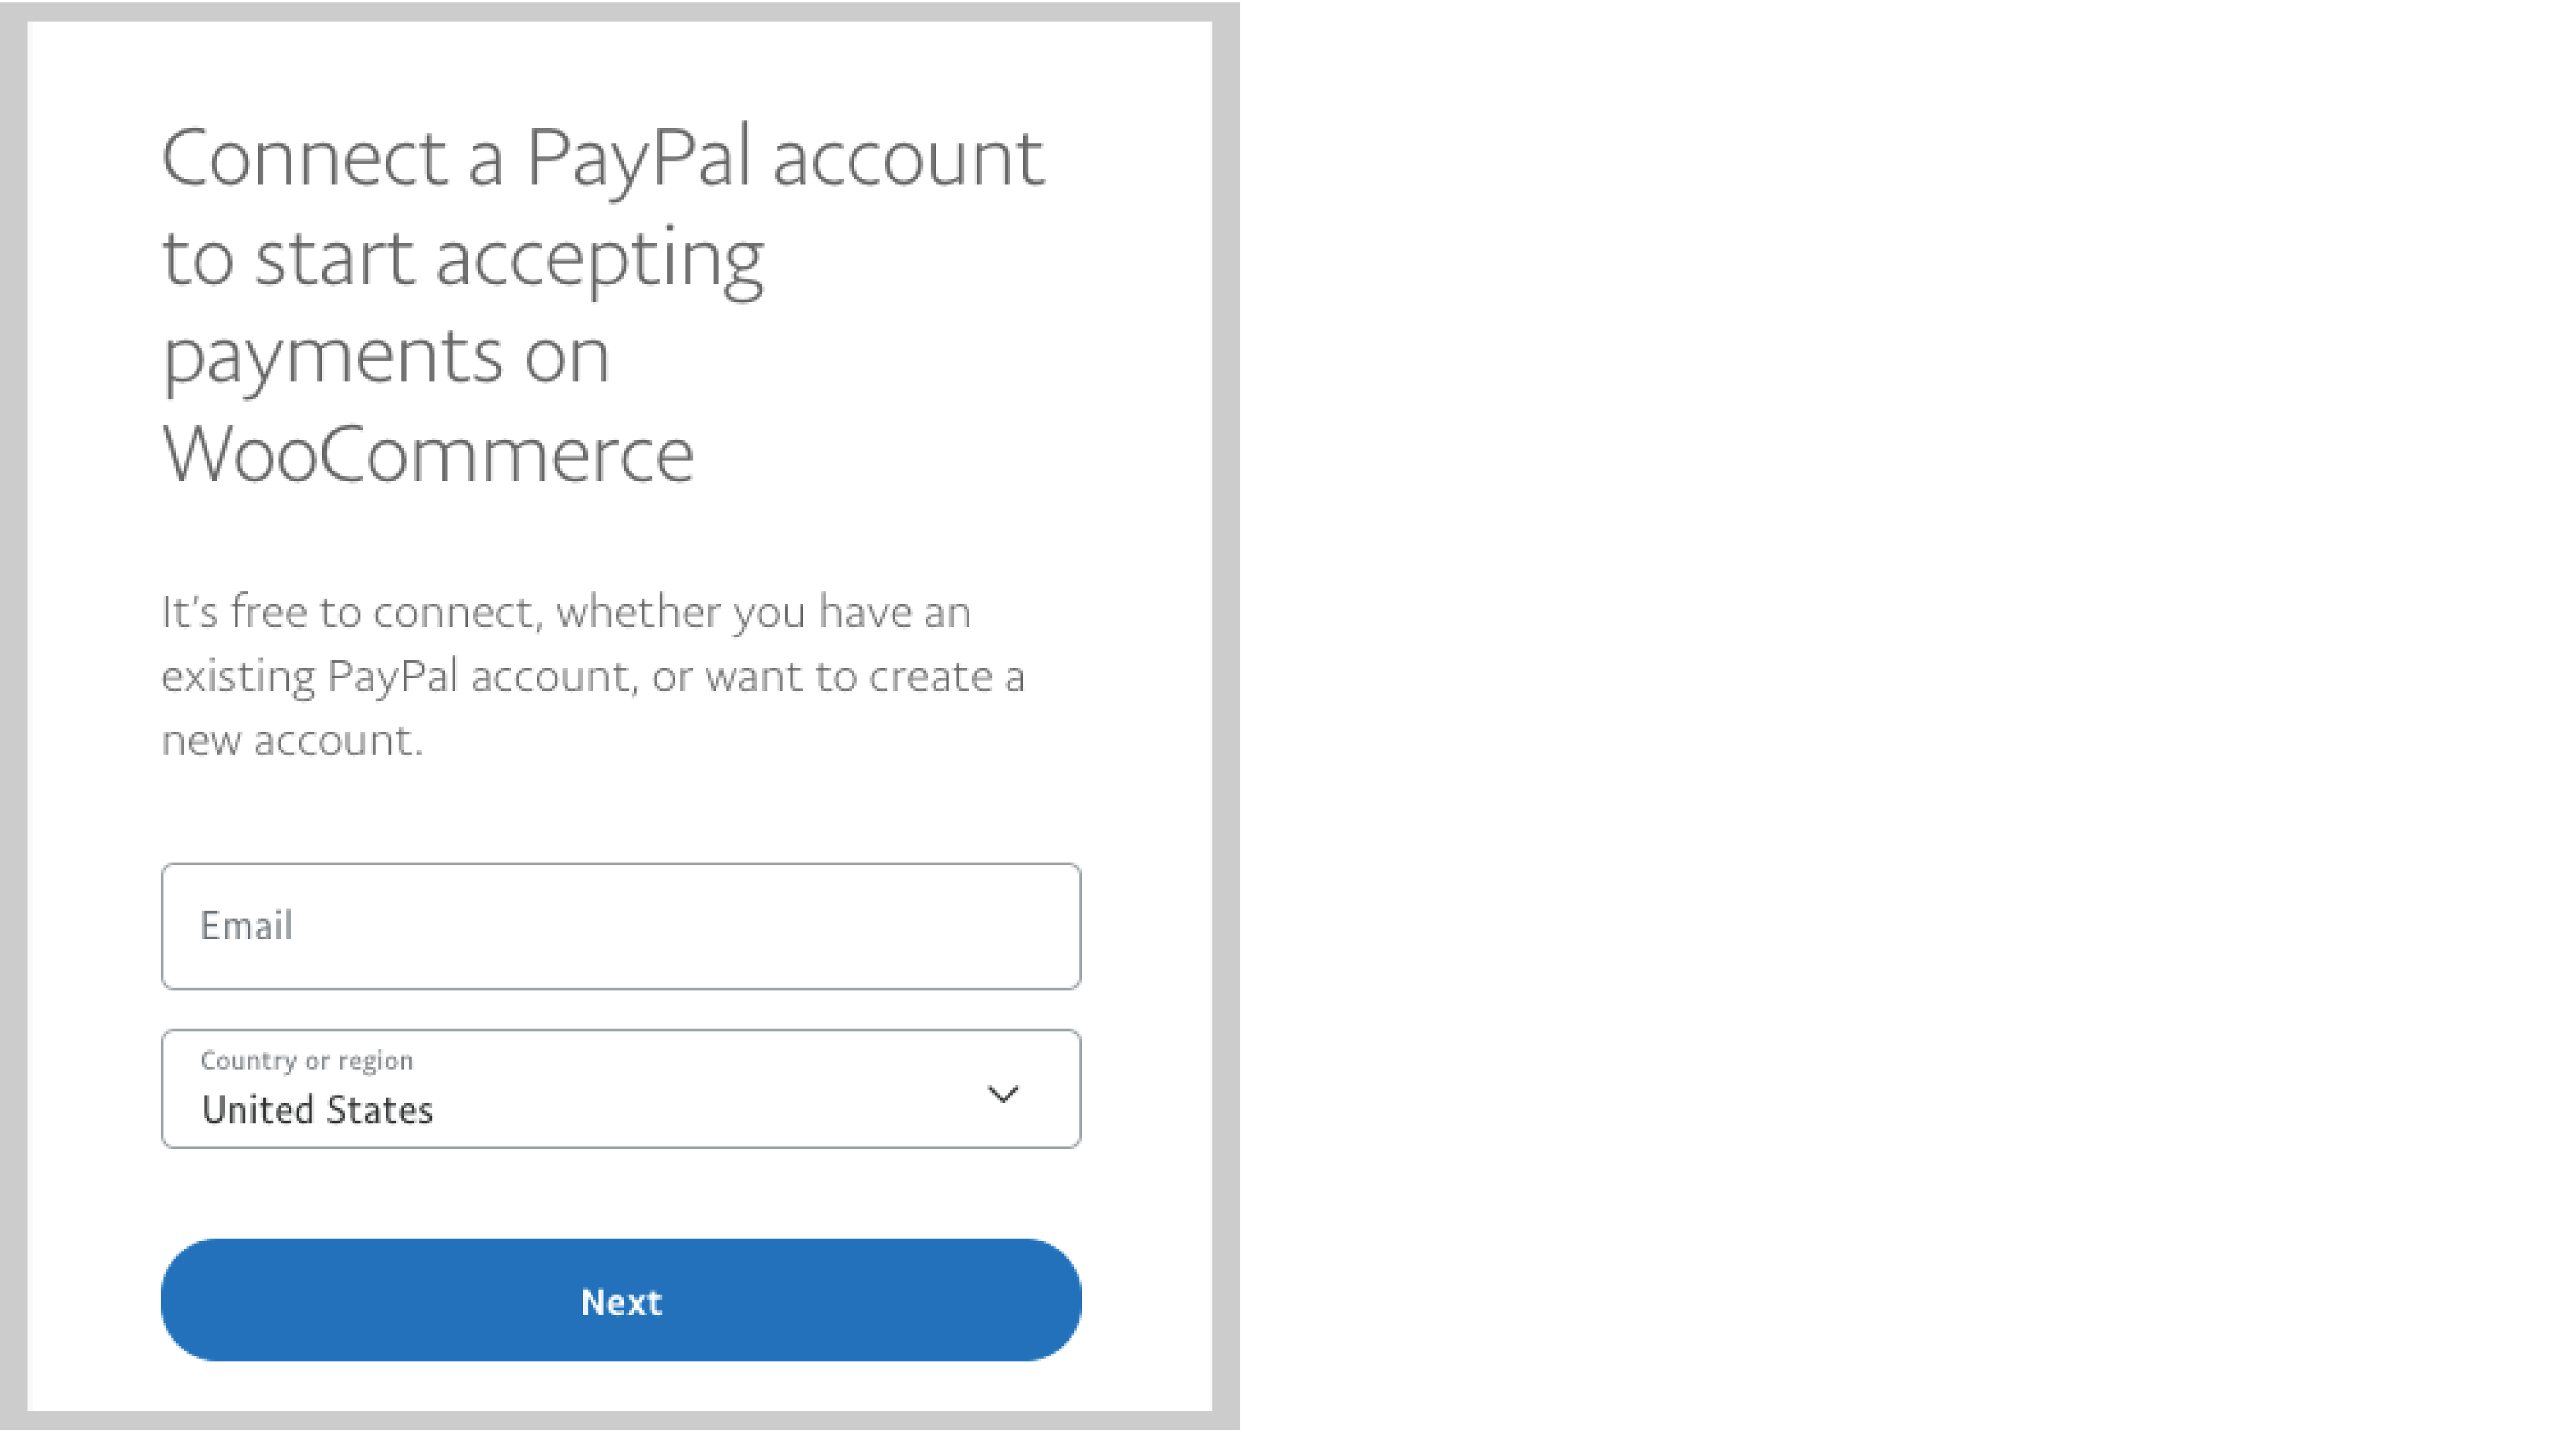 Connect to Paypal account